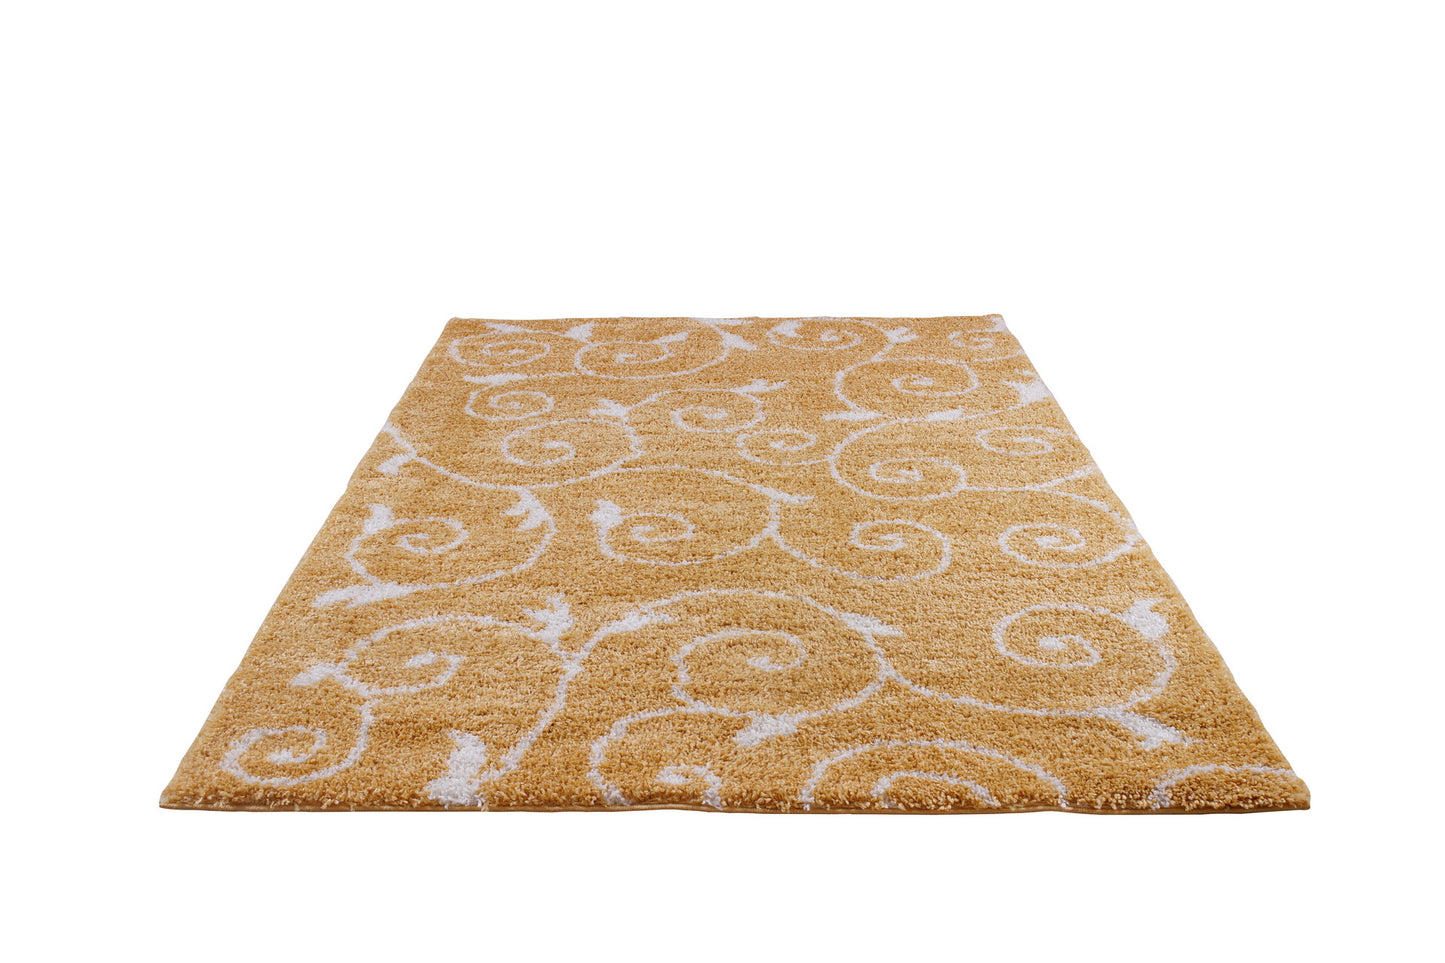 ladole rugs shaggy rabat abstract pattern sustainable spirals style indoor small mat doormat rug in dark yellow white 110 x 211 57cm x 90cm 2x8, 3x10, 2x10 ft Long Runner Rug, Hallway, Balcony, Entry Way, Kitchen, Stairs